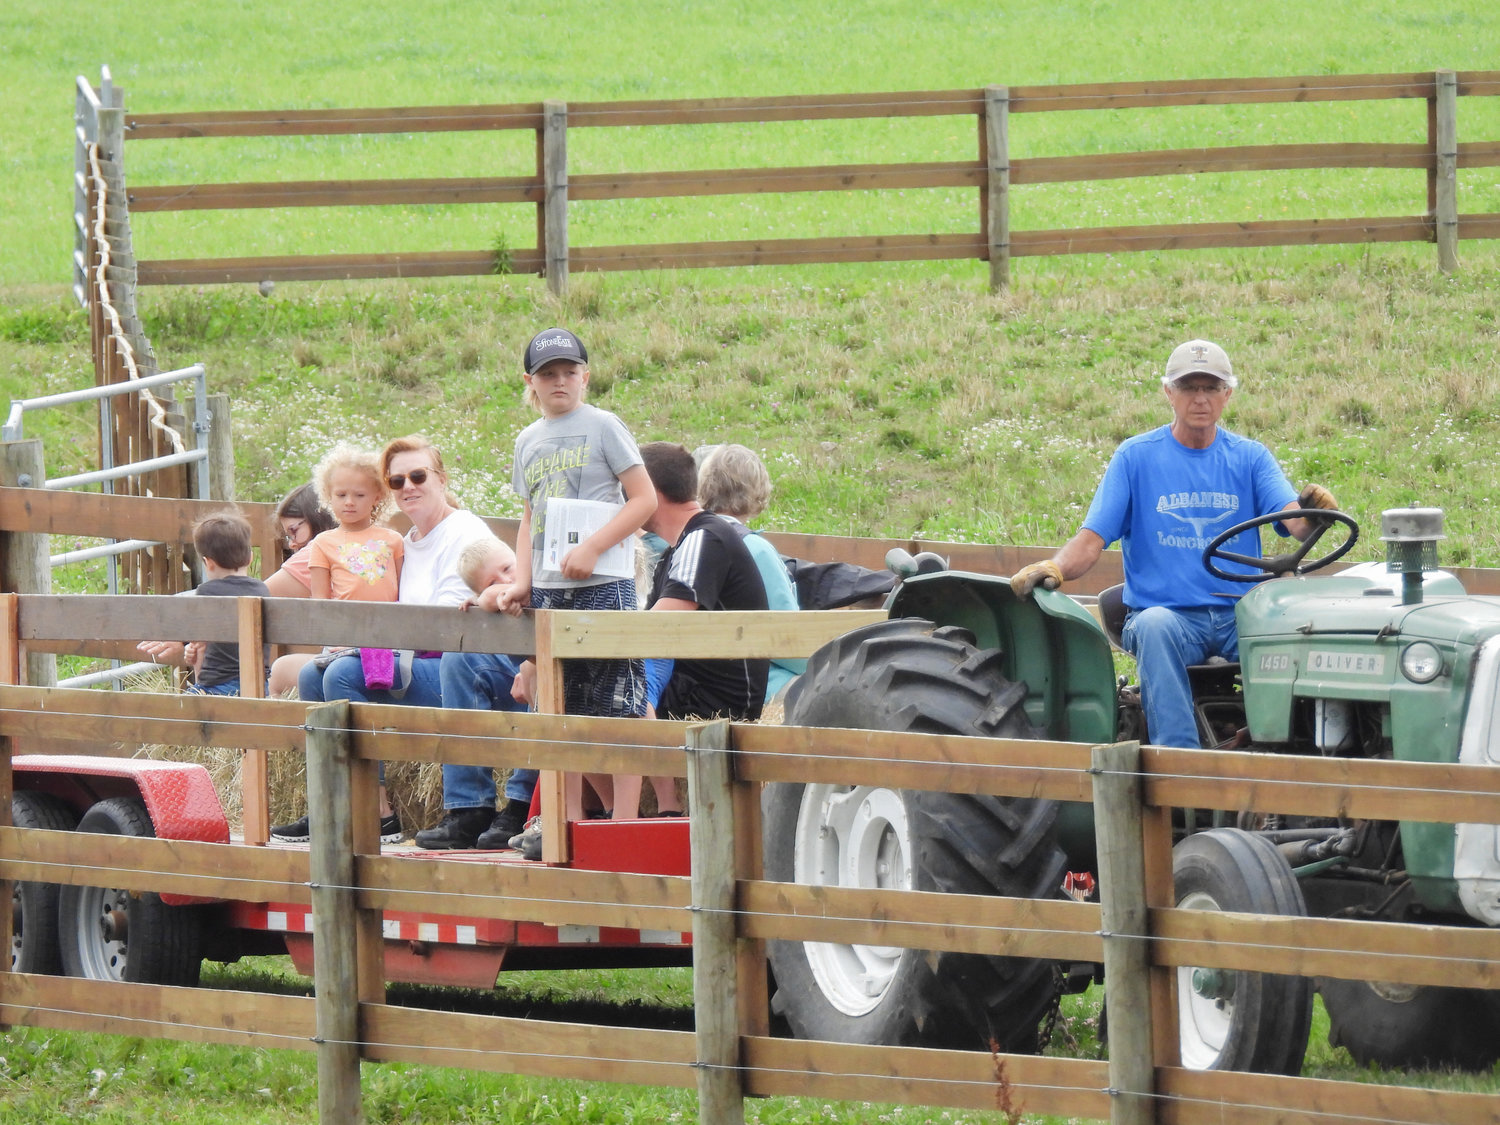 Open Farm Day on Saturday, July 30 saw people from all over visiting their local farms and seeing firsthand what they offer to the community. Albanese Longhorns in Cazenovia saw people from all over getting a look at a kind of cattle that's not normally seen in New York.